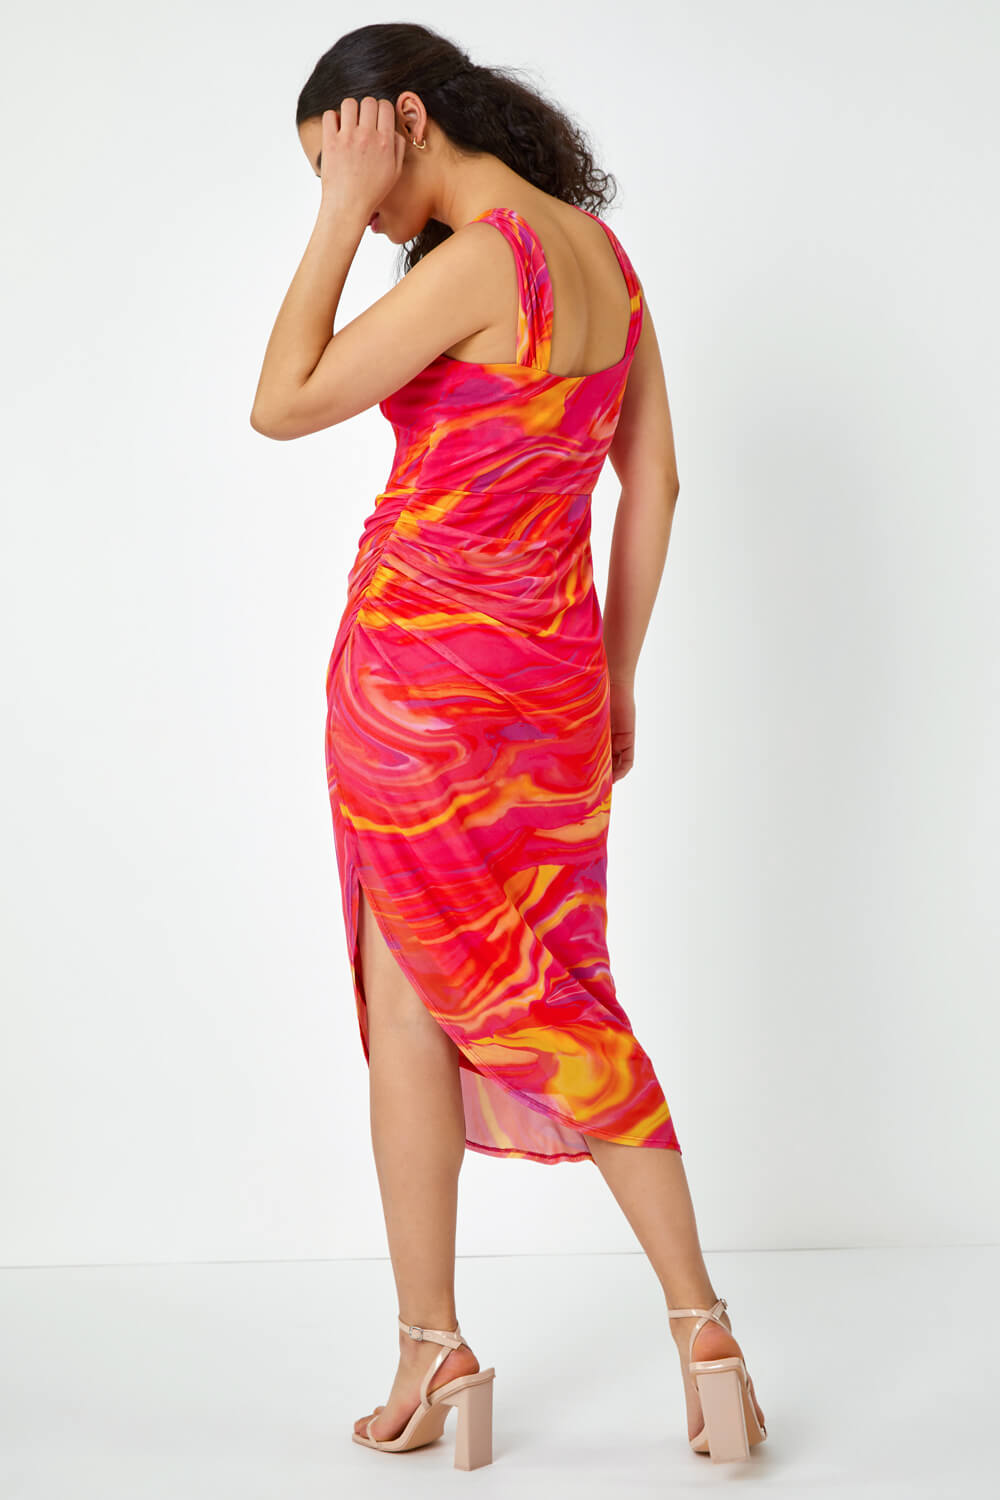 PINK Swirl Print Ruched Stretch Dress, Image 3 of 5